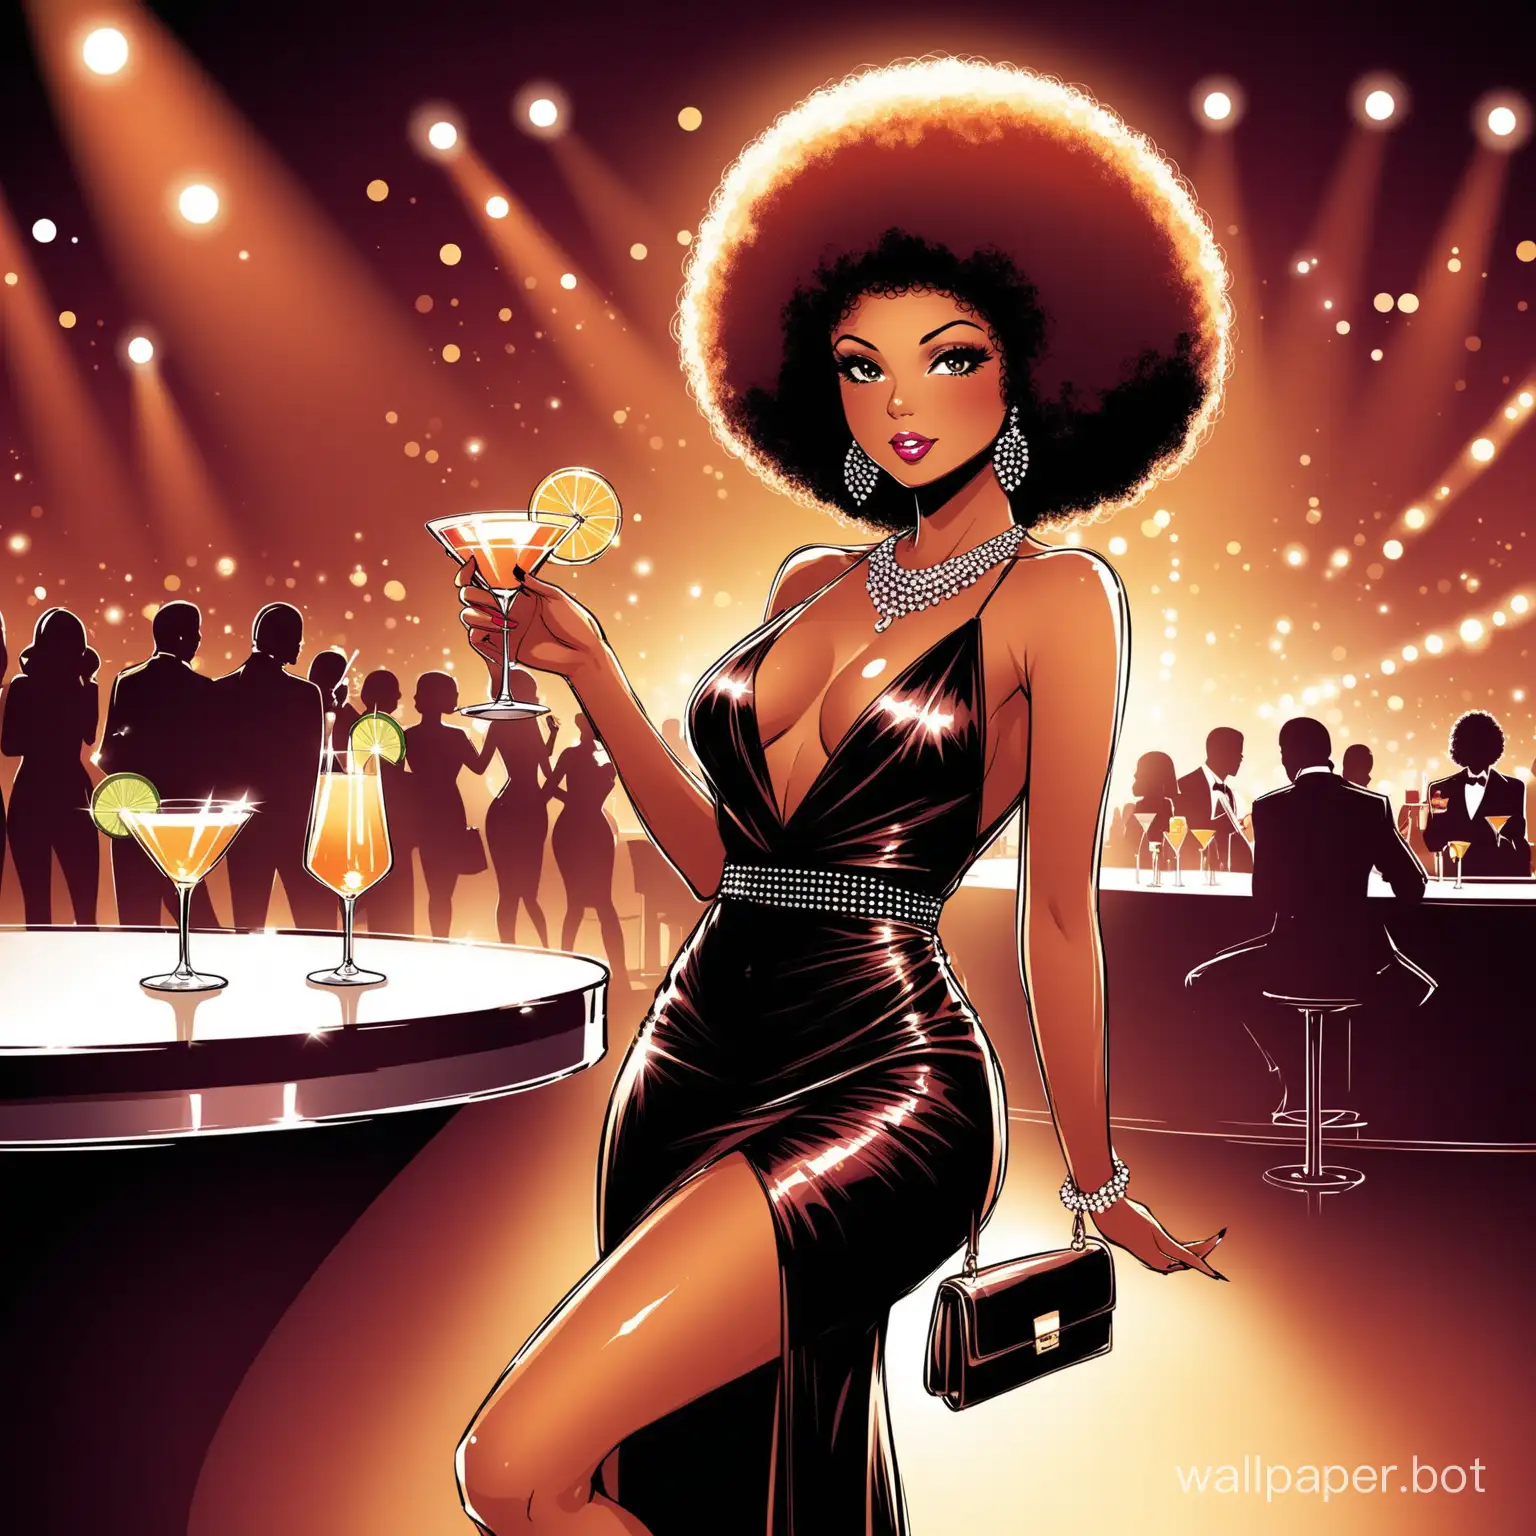 sexy glamourous lady with an afro in a a nightclub , holding a martini cocktail in her hand and designer bag on the table, wearing  high heels and an expensive cocktail dress   -  illustration